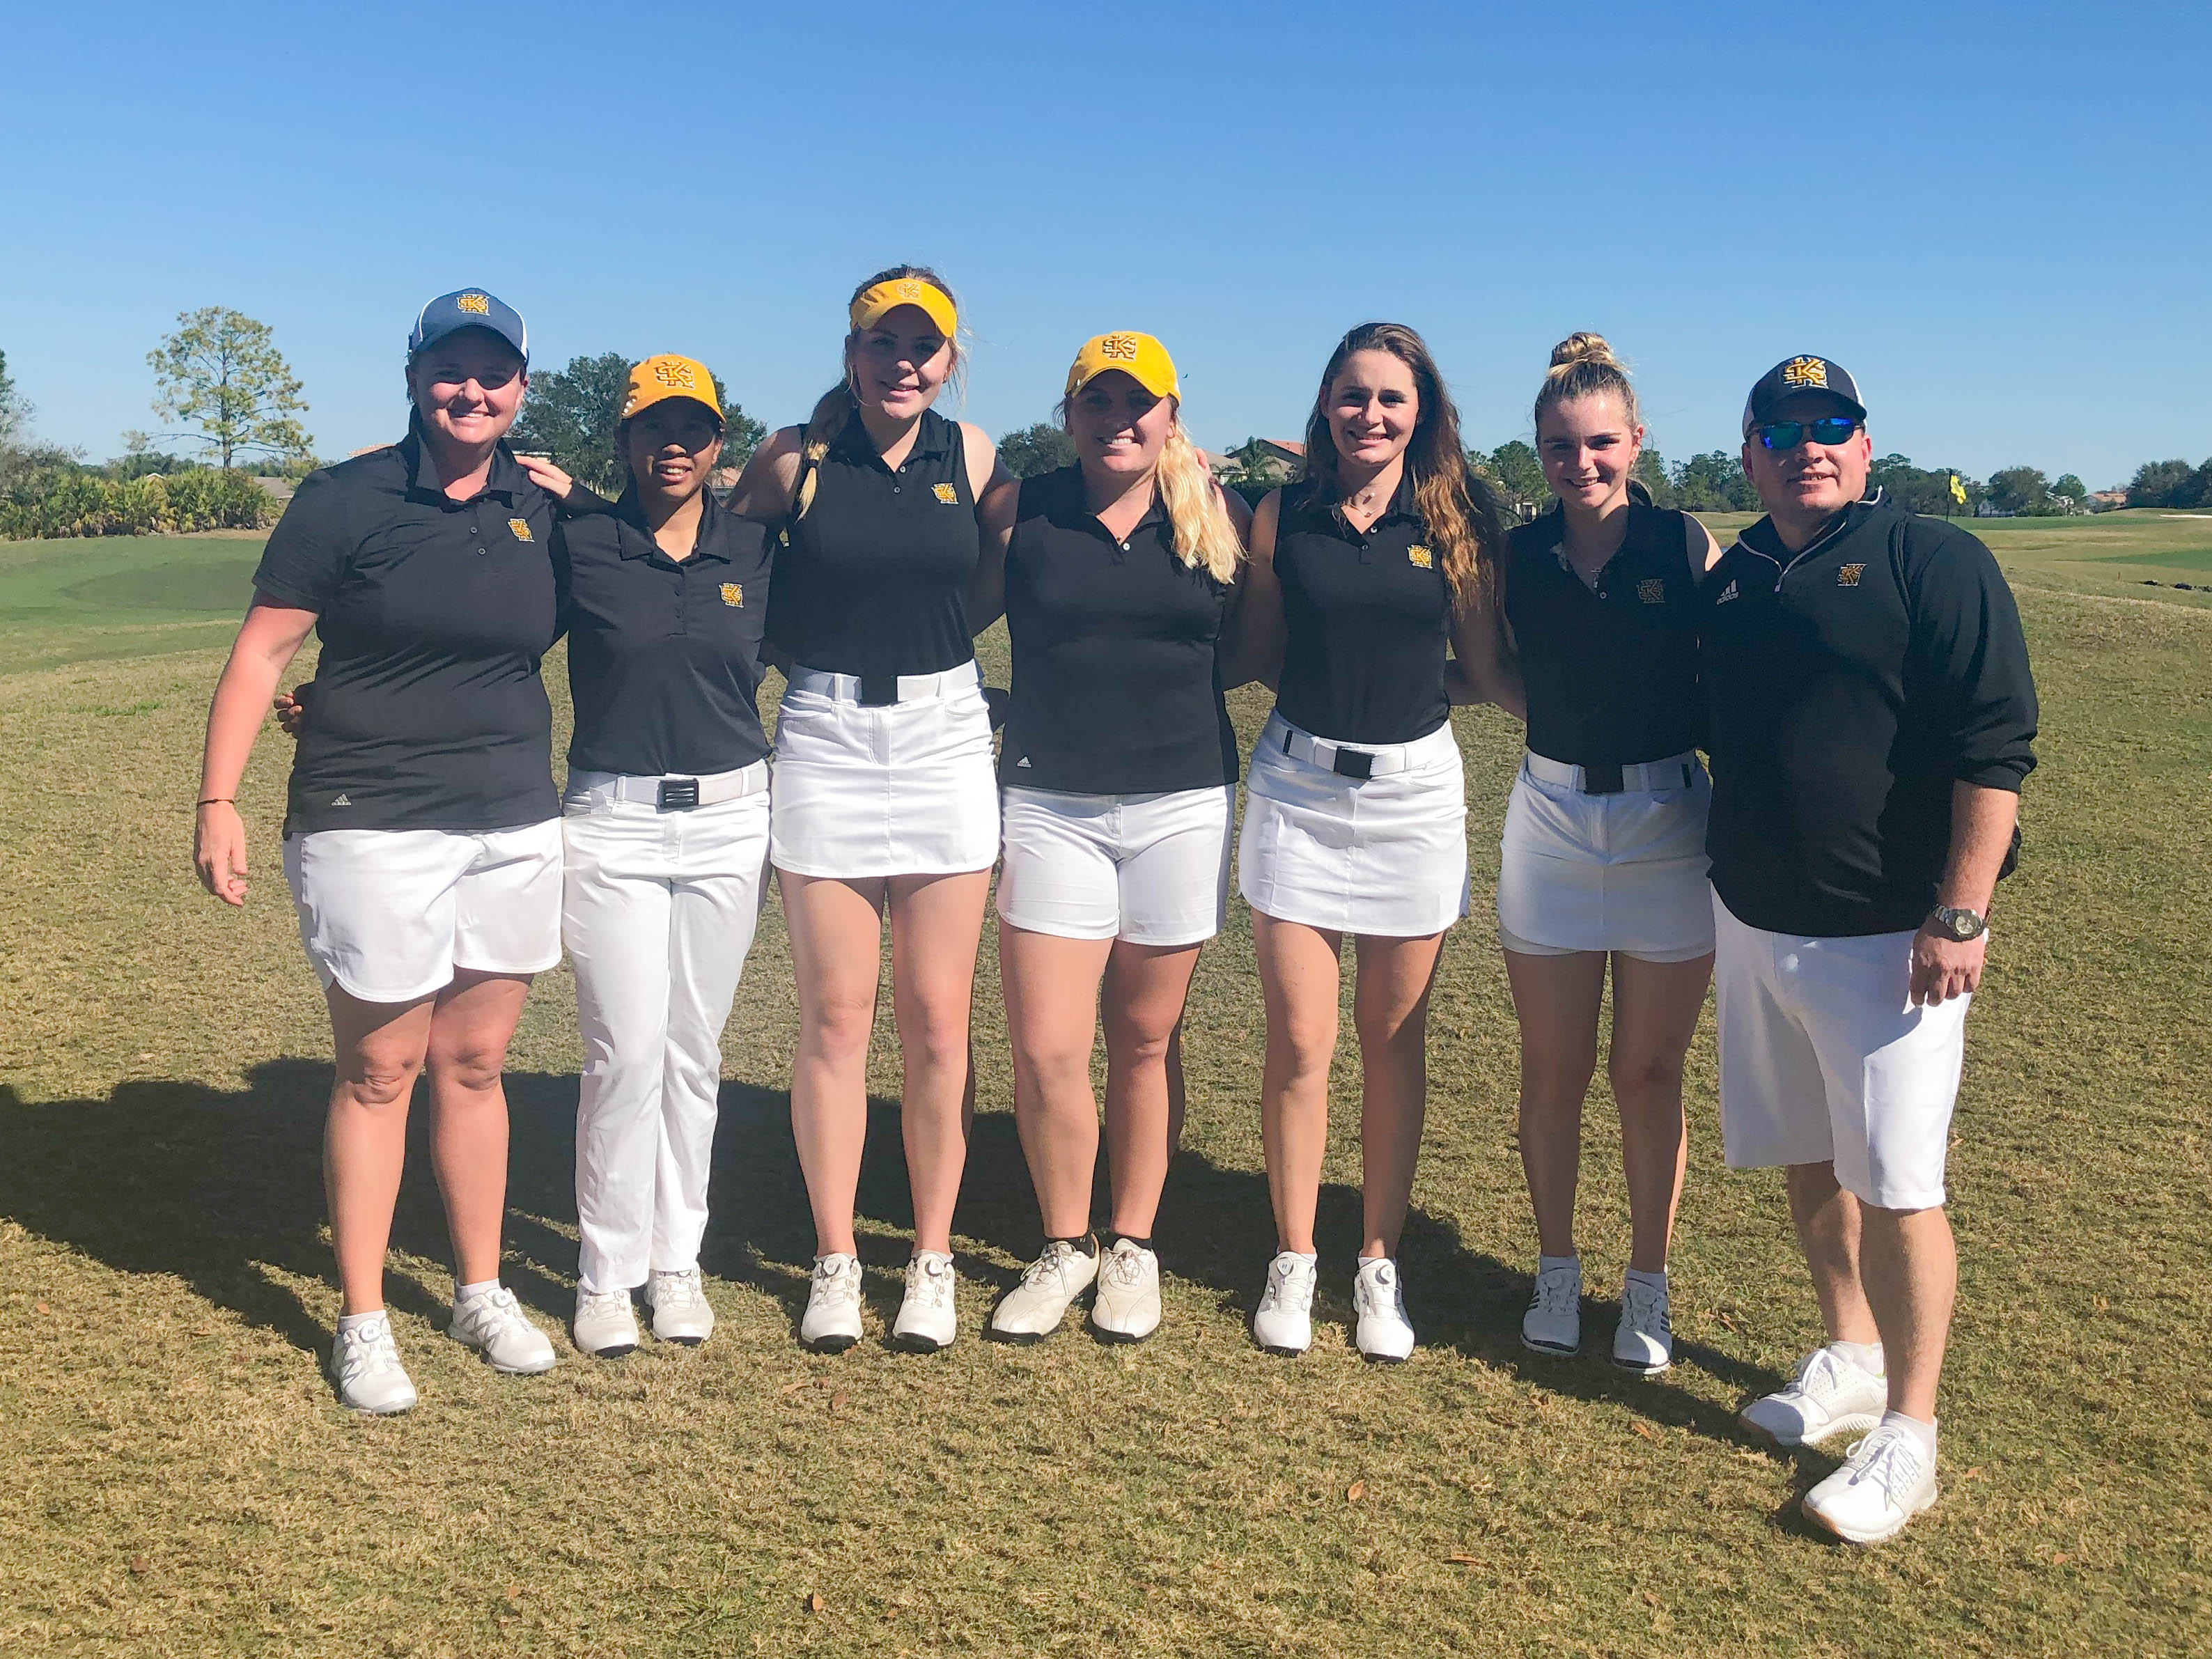 A year since conference title, women’s golf team continues to improve